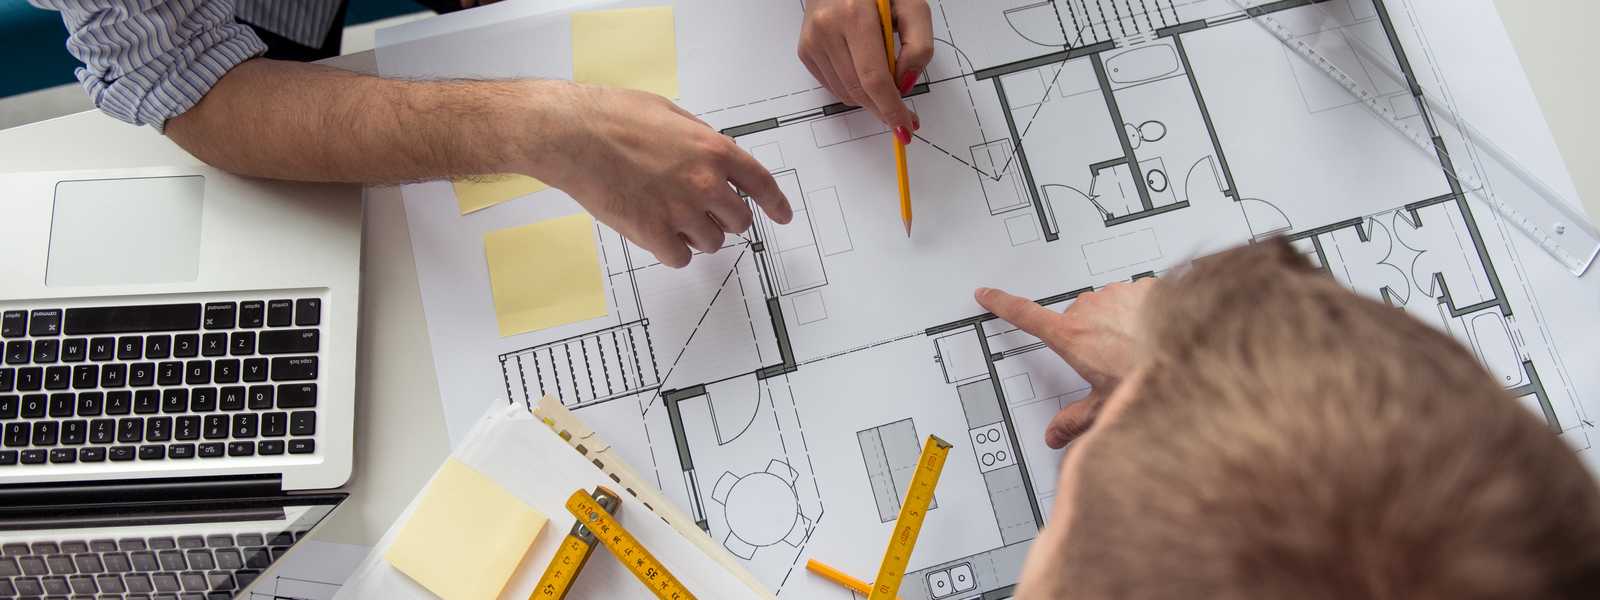 Architectural planning technical drawings